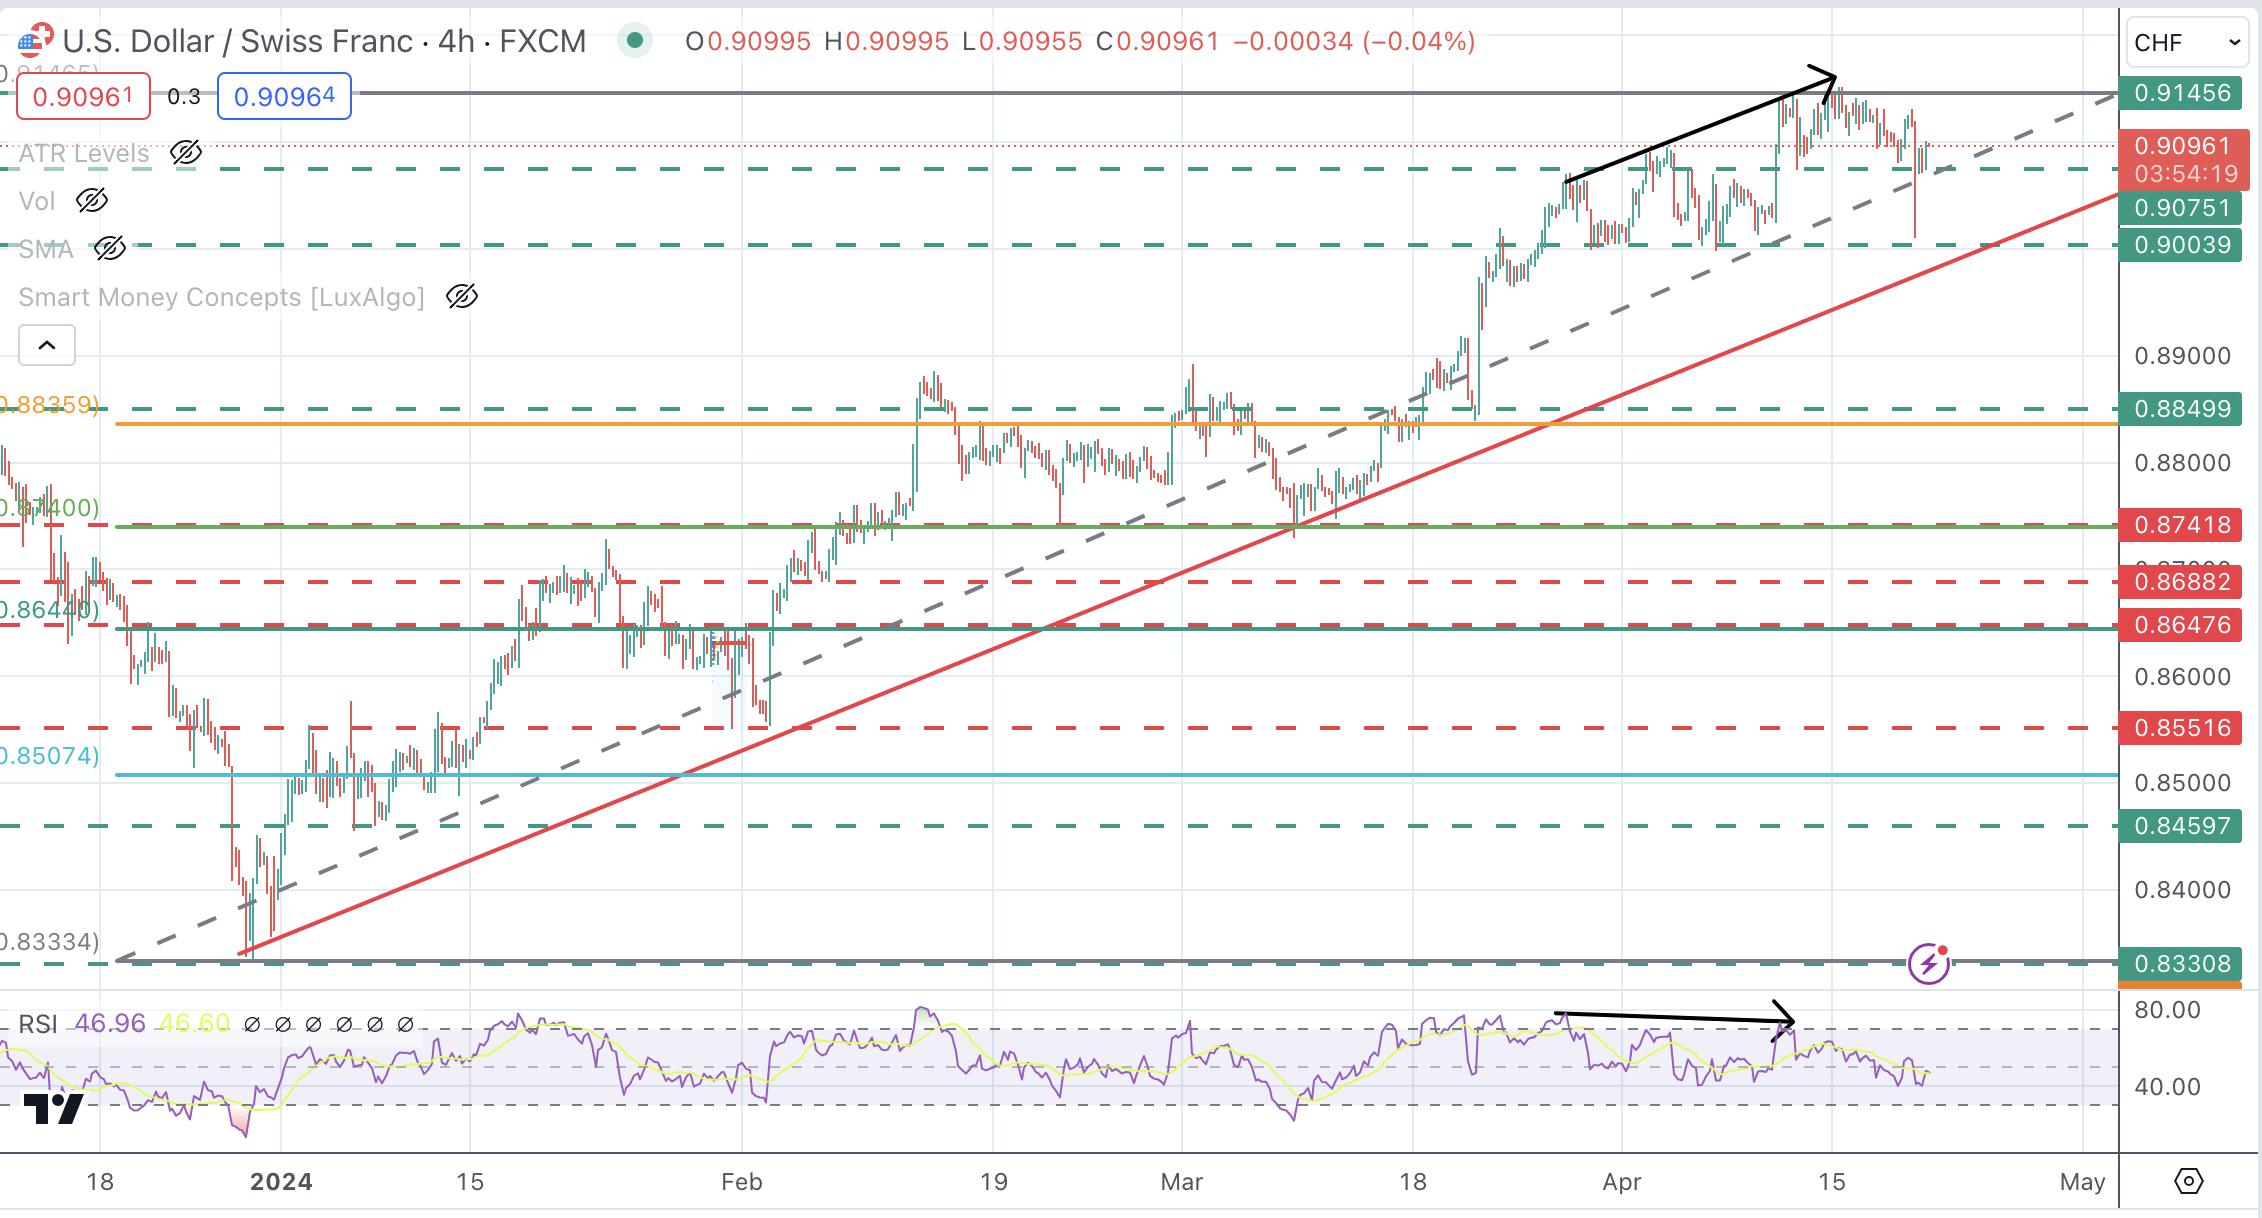 USD/CHF picks up from 0.9075 support following Fed Golsbee’s comments